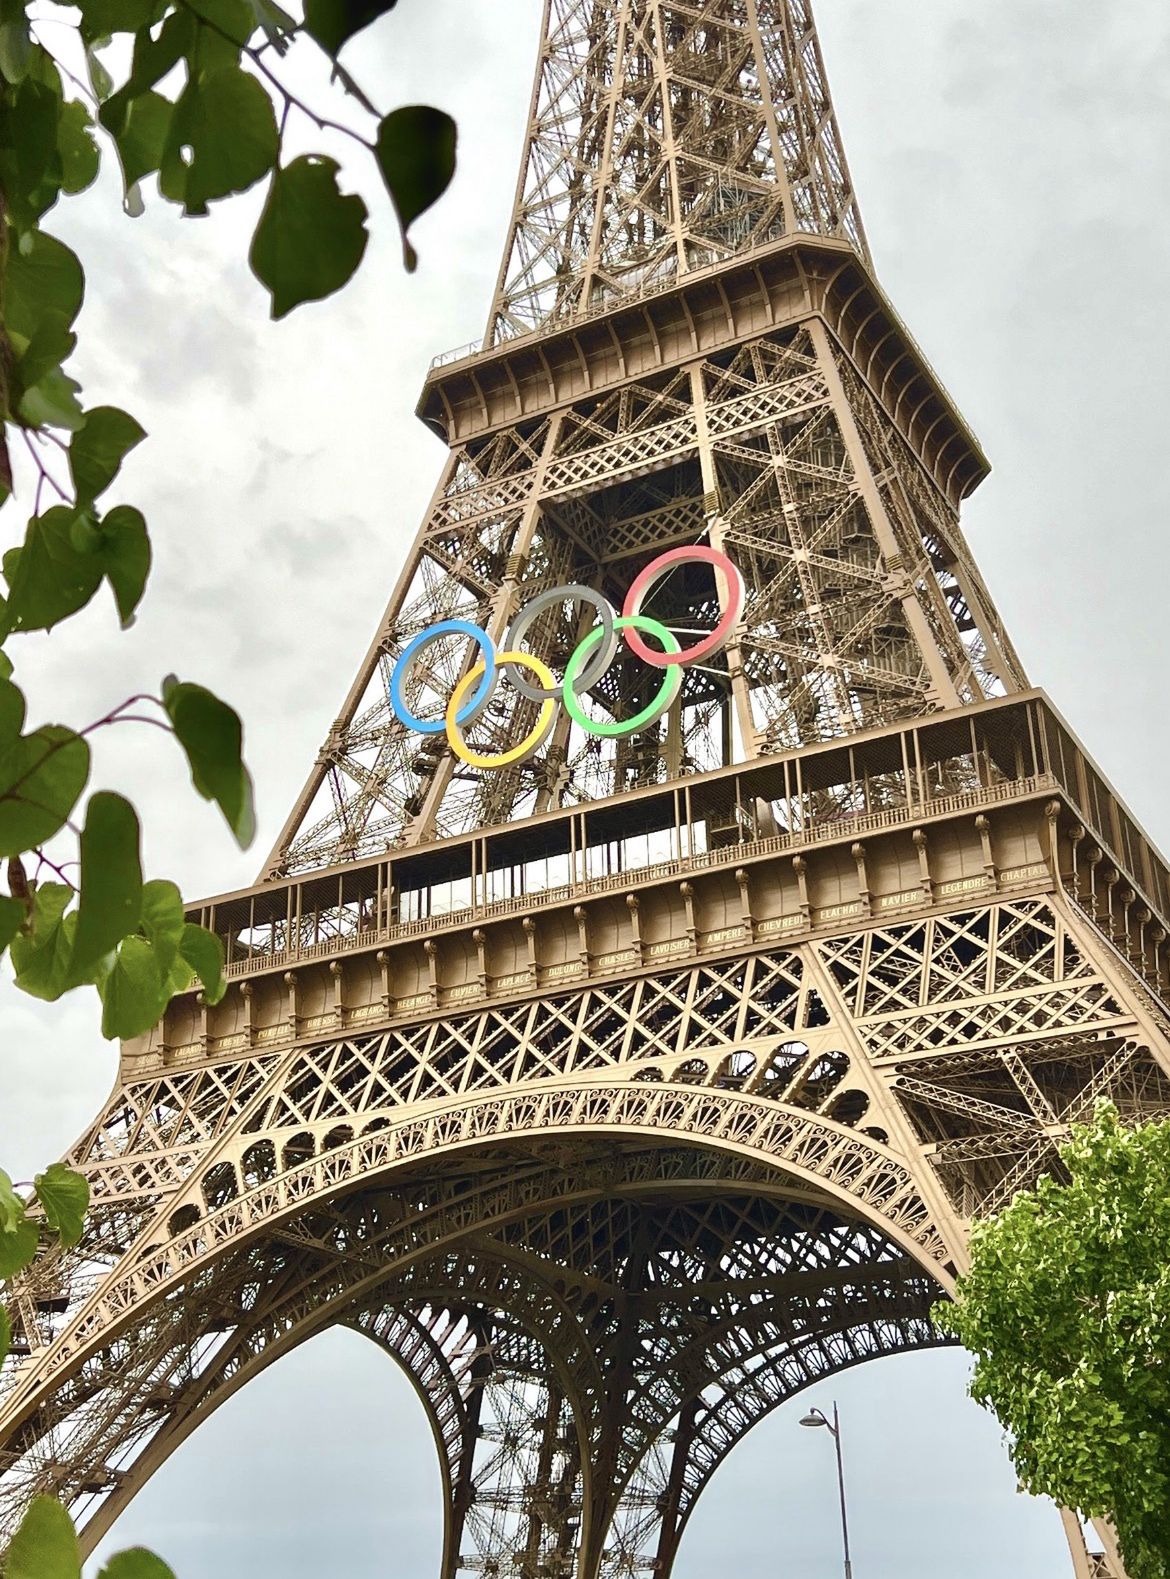 The Eiffel Tower is already adorned with Olympic rings today.